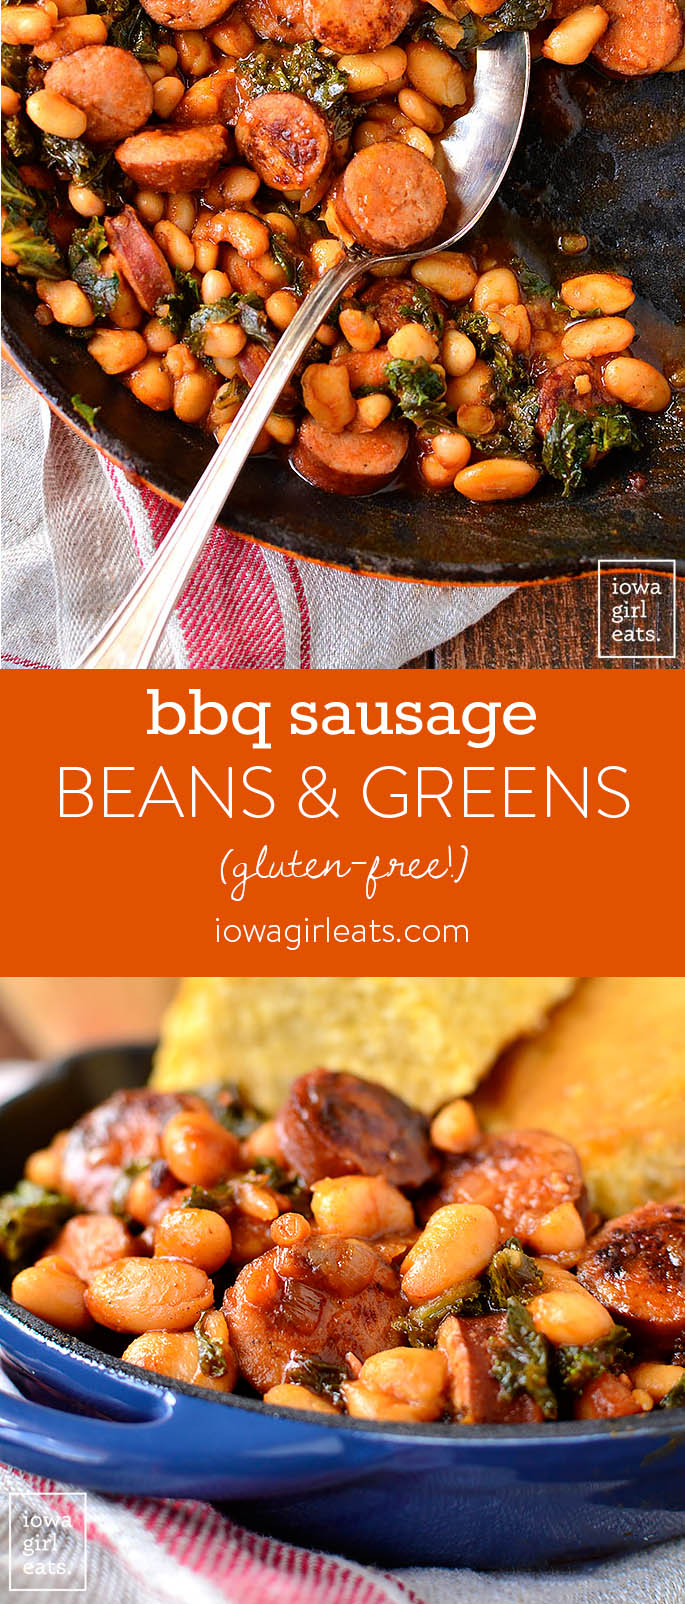 BBQ Sausage, Beans and Greens is an easy gluten-free dinner recipe that calls for just 7 ingredients, and is packed with protein, vitamins, and minerals. | iowagirleats.com